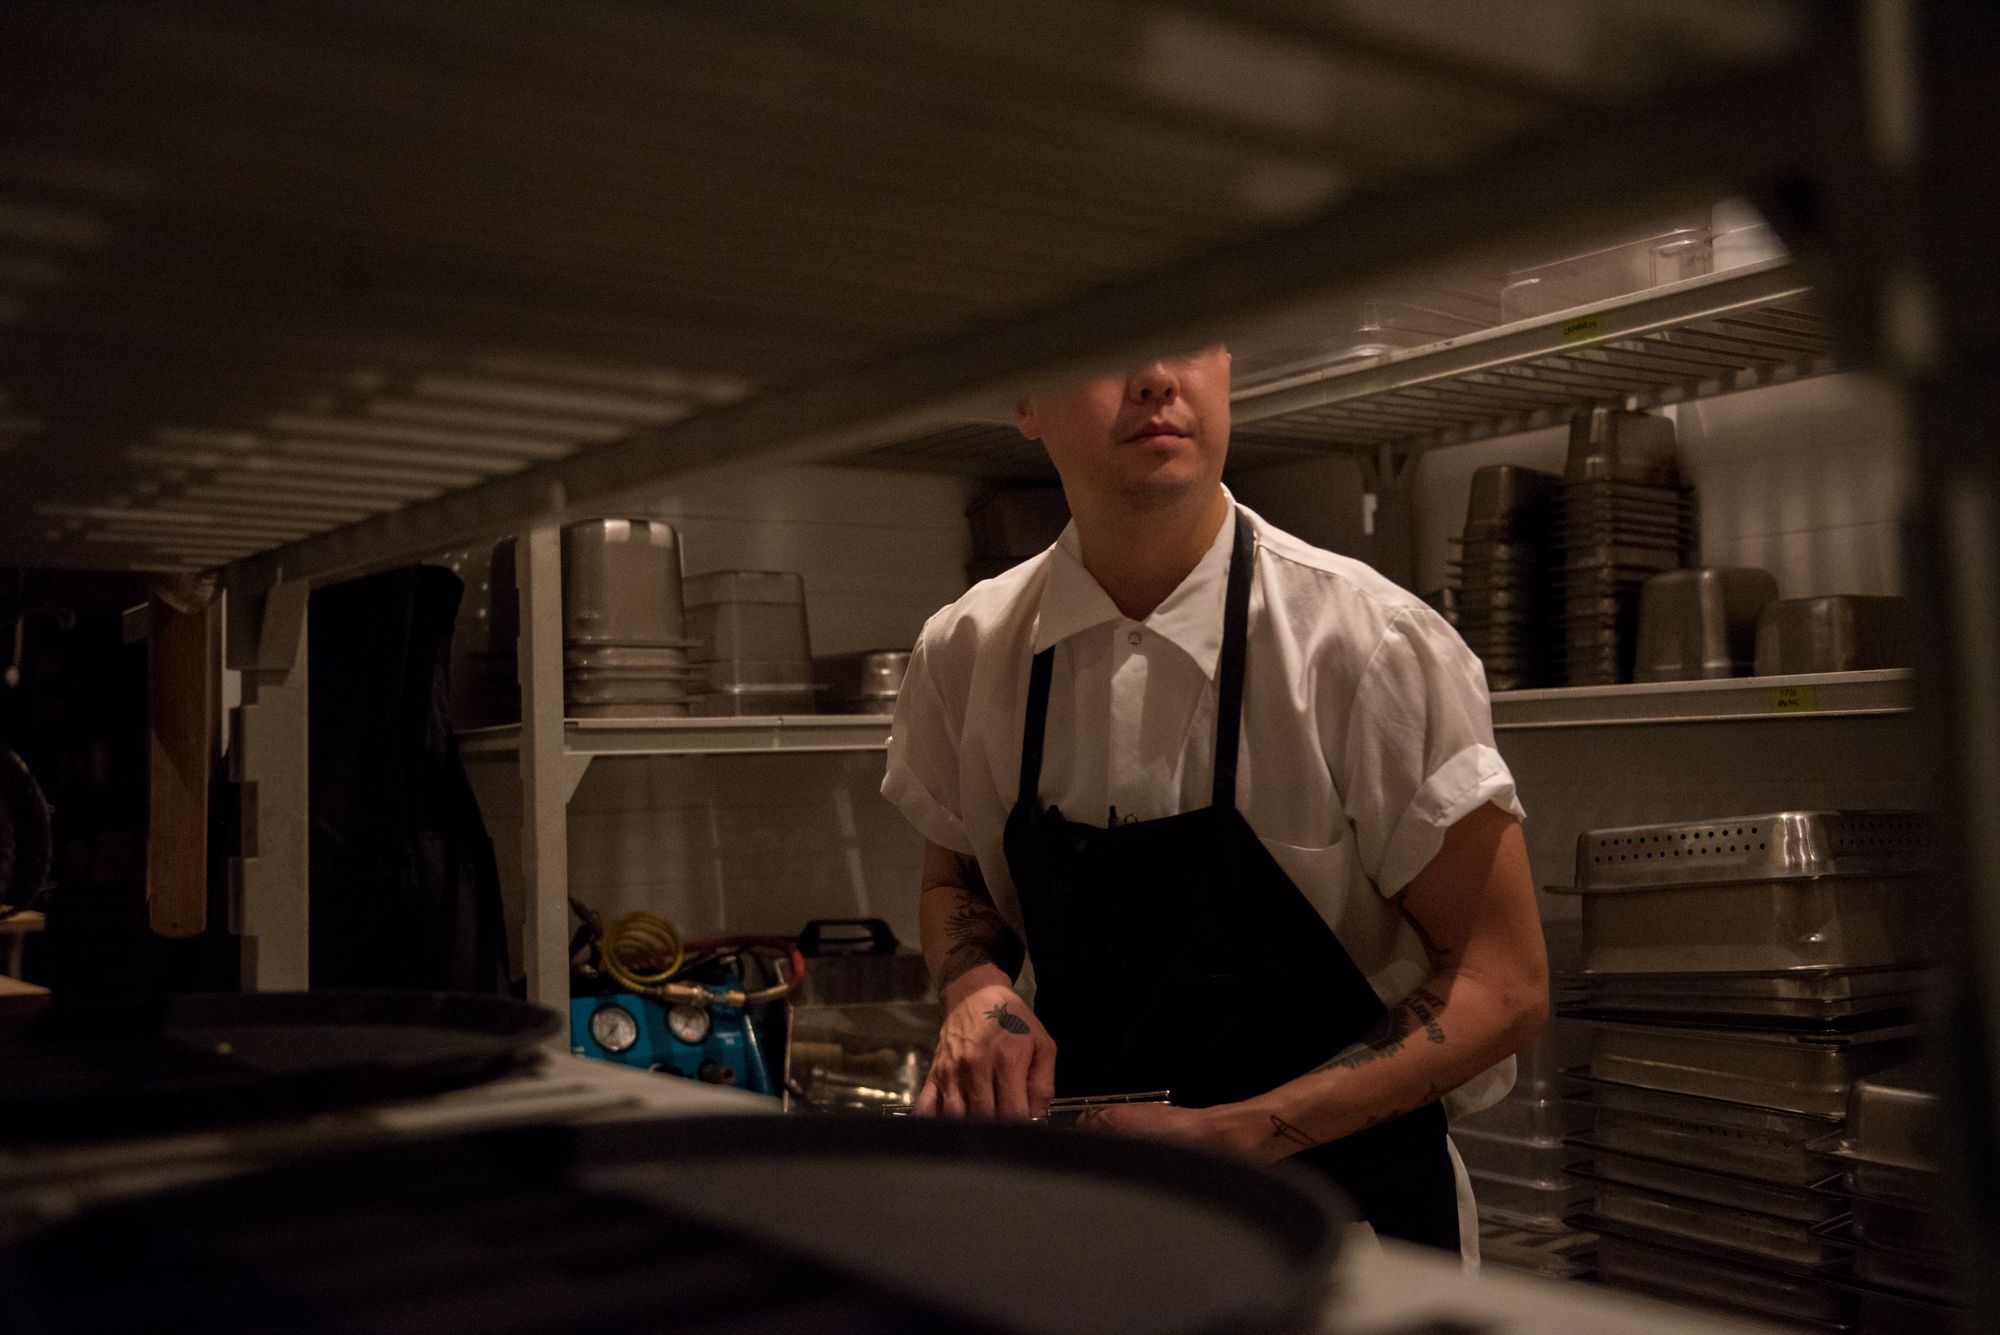  Eric Ehler works late in the kitchen at Mister Jiu’s on Wednesday, March 21, 2018. | Rosa Furneaux, Special To The Chronicle 